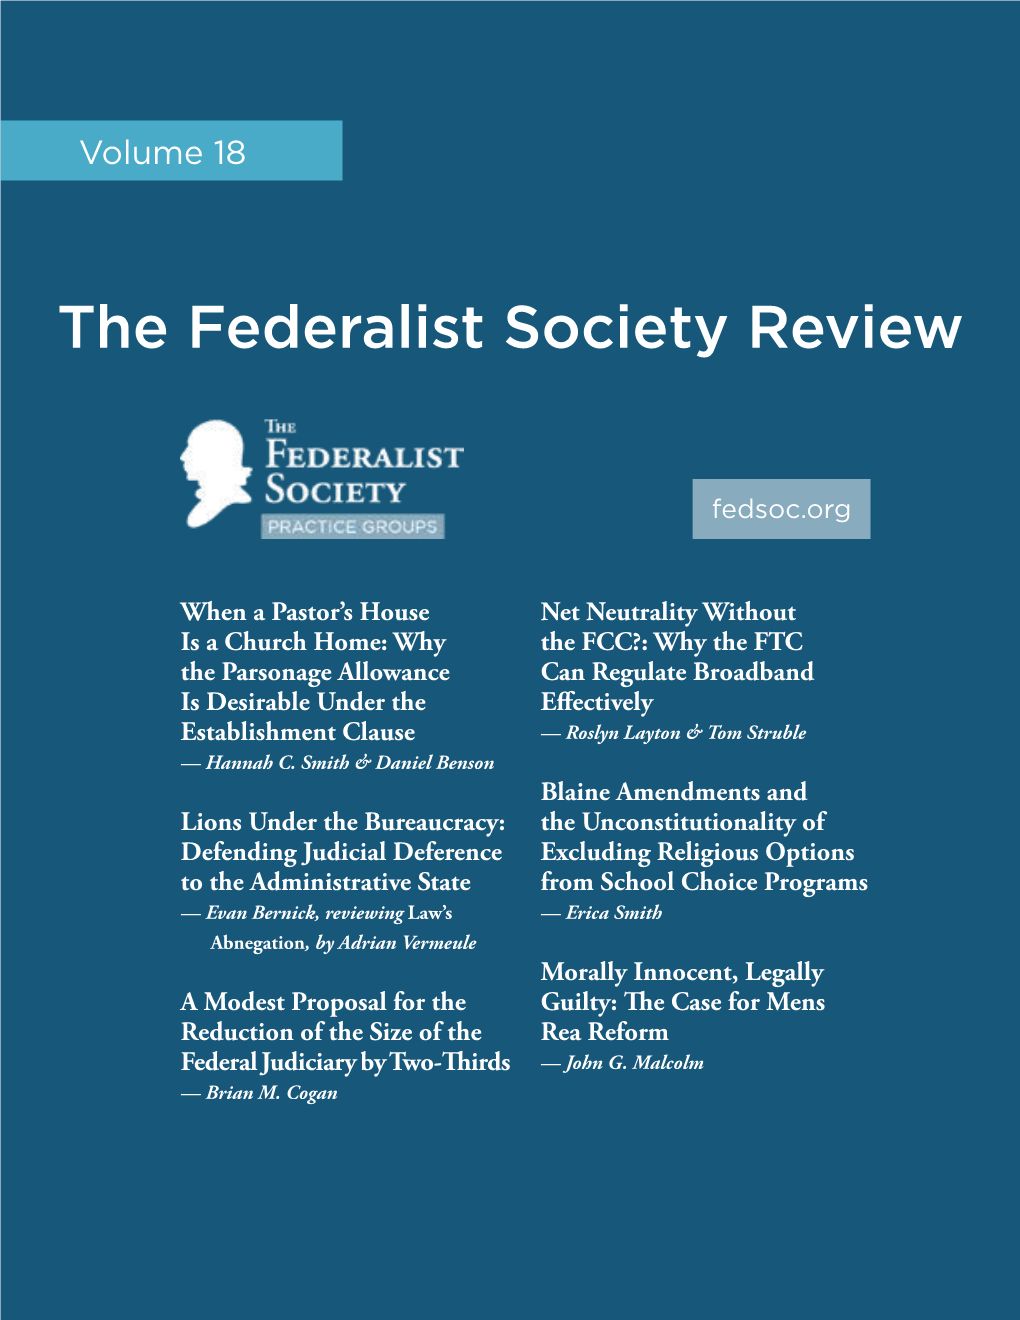 The Federalist Society Review